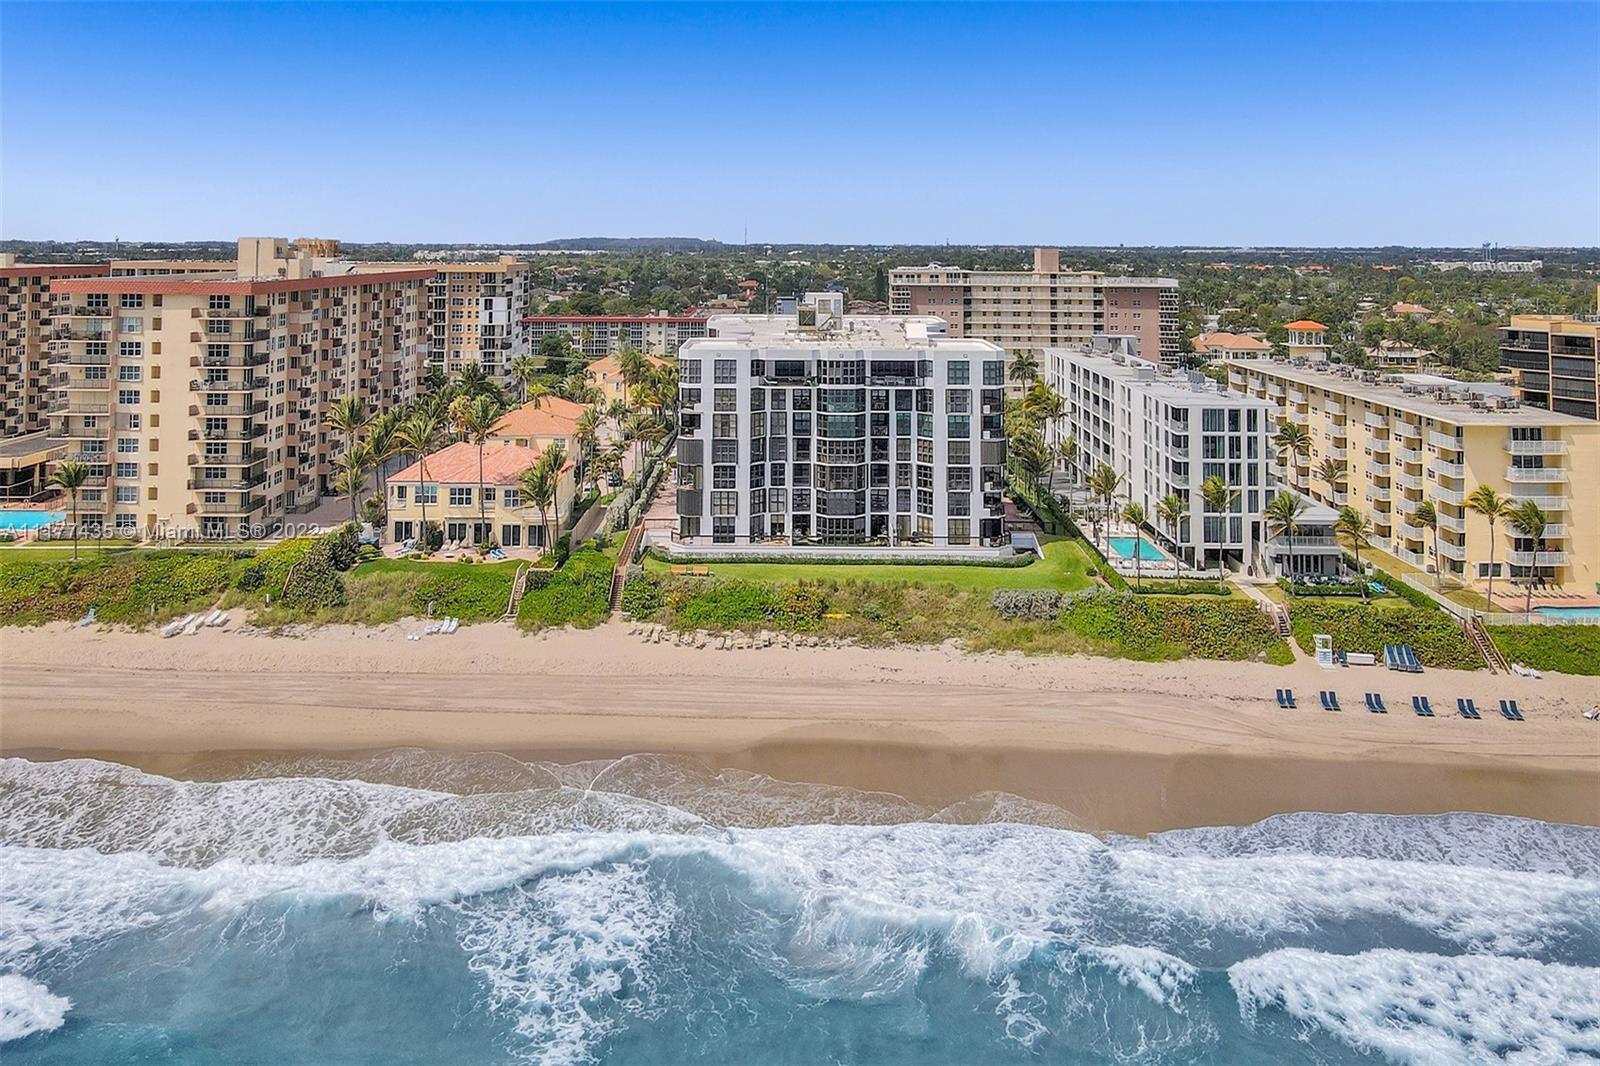 Ocean views from multiple balconies and windows.This spacious 3 bed unit covers 2100 sq.ft. in this 